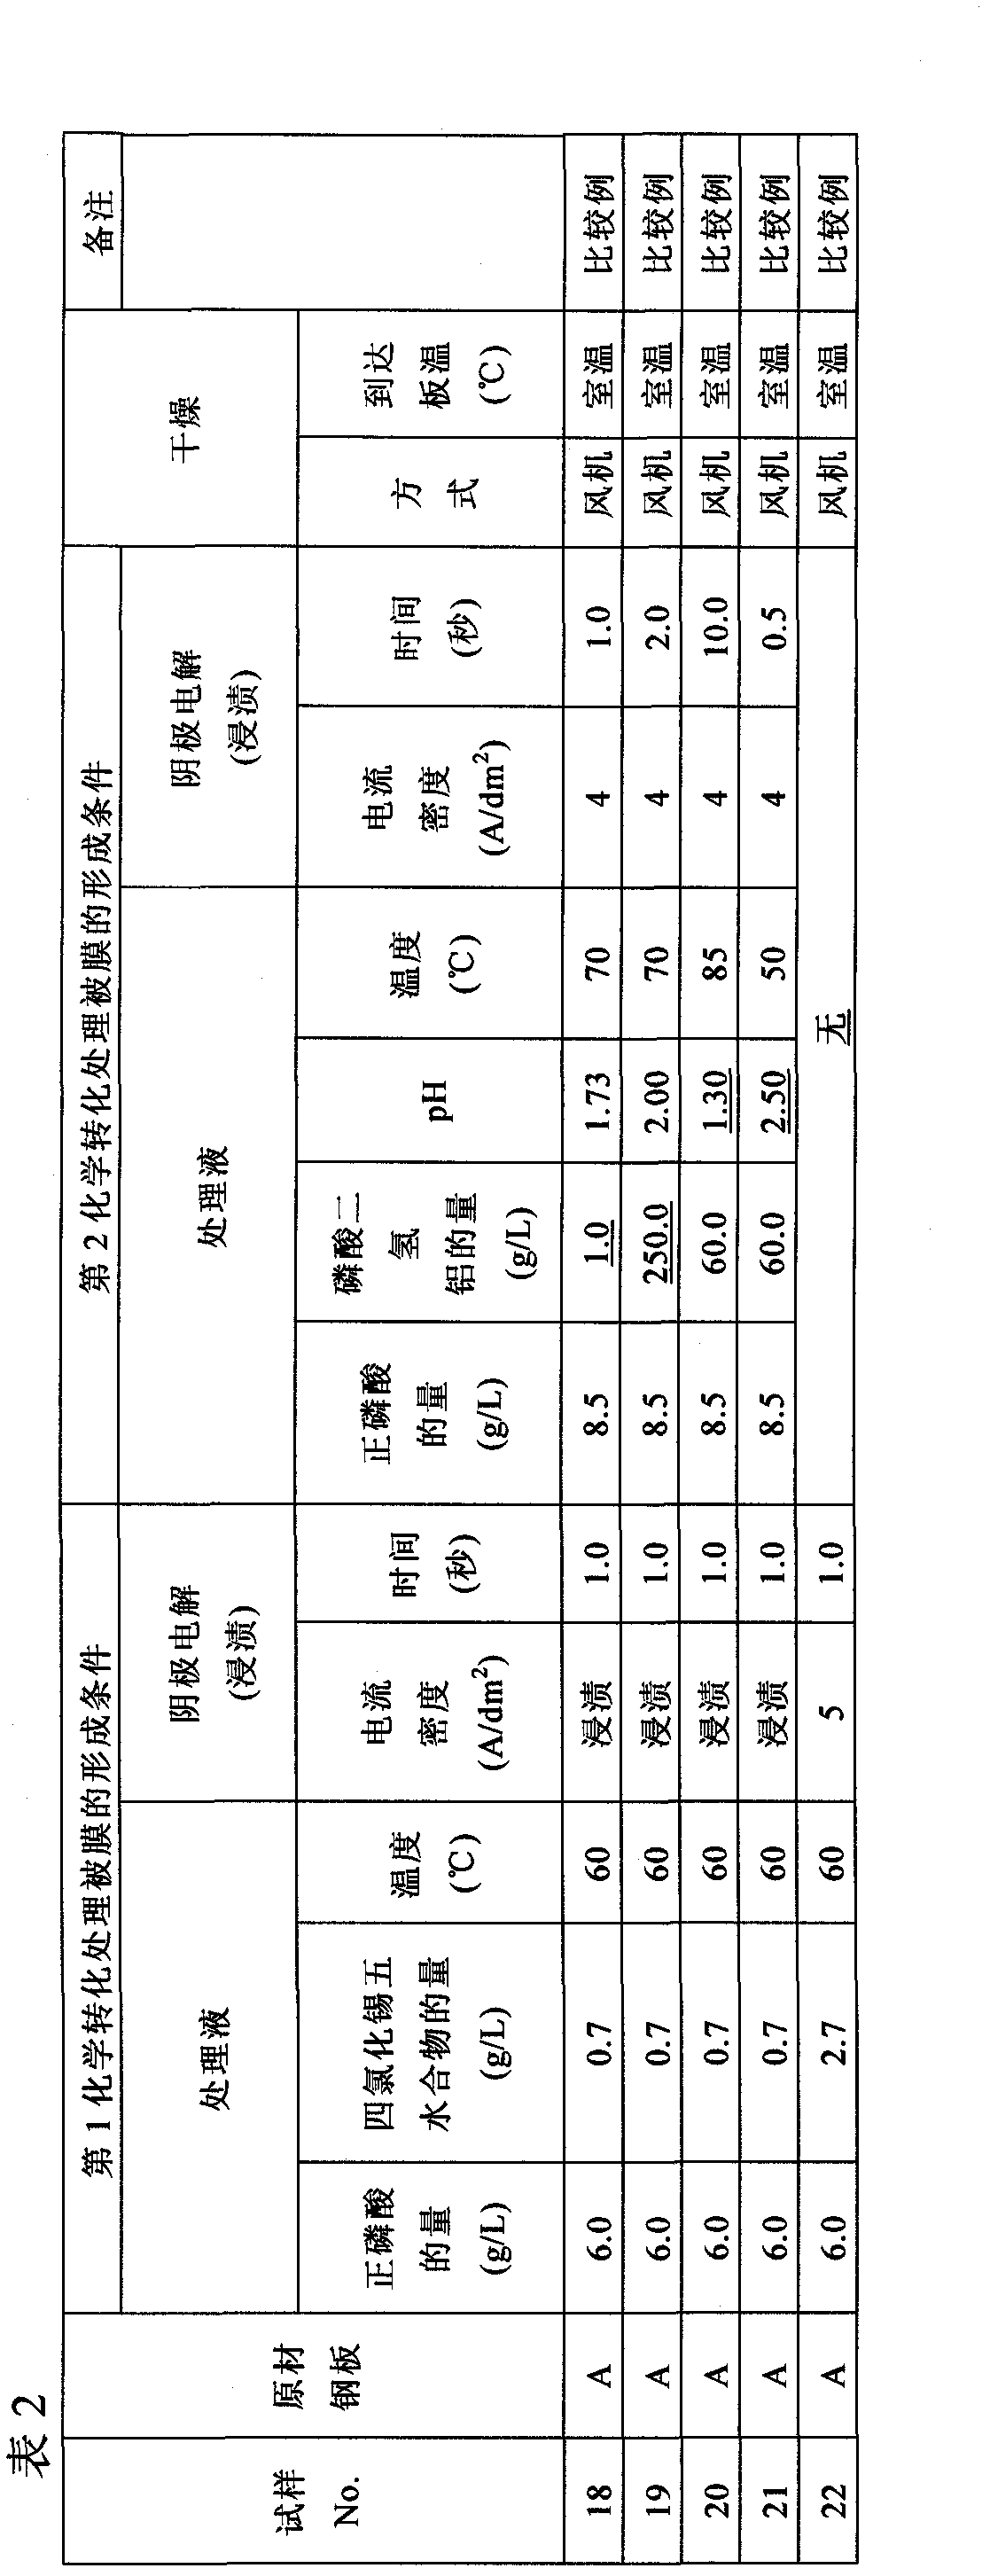 Tin-plated steel plate and process for producing the tin-plated steel plate